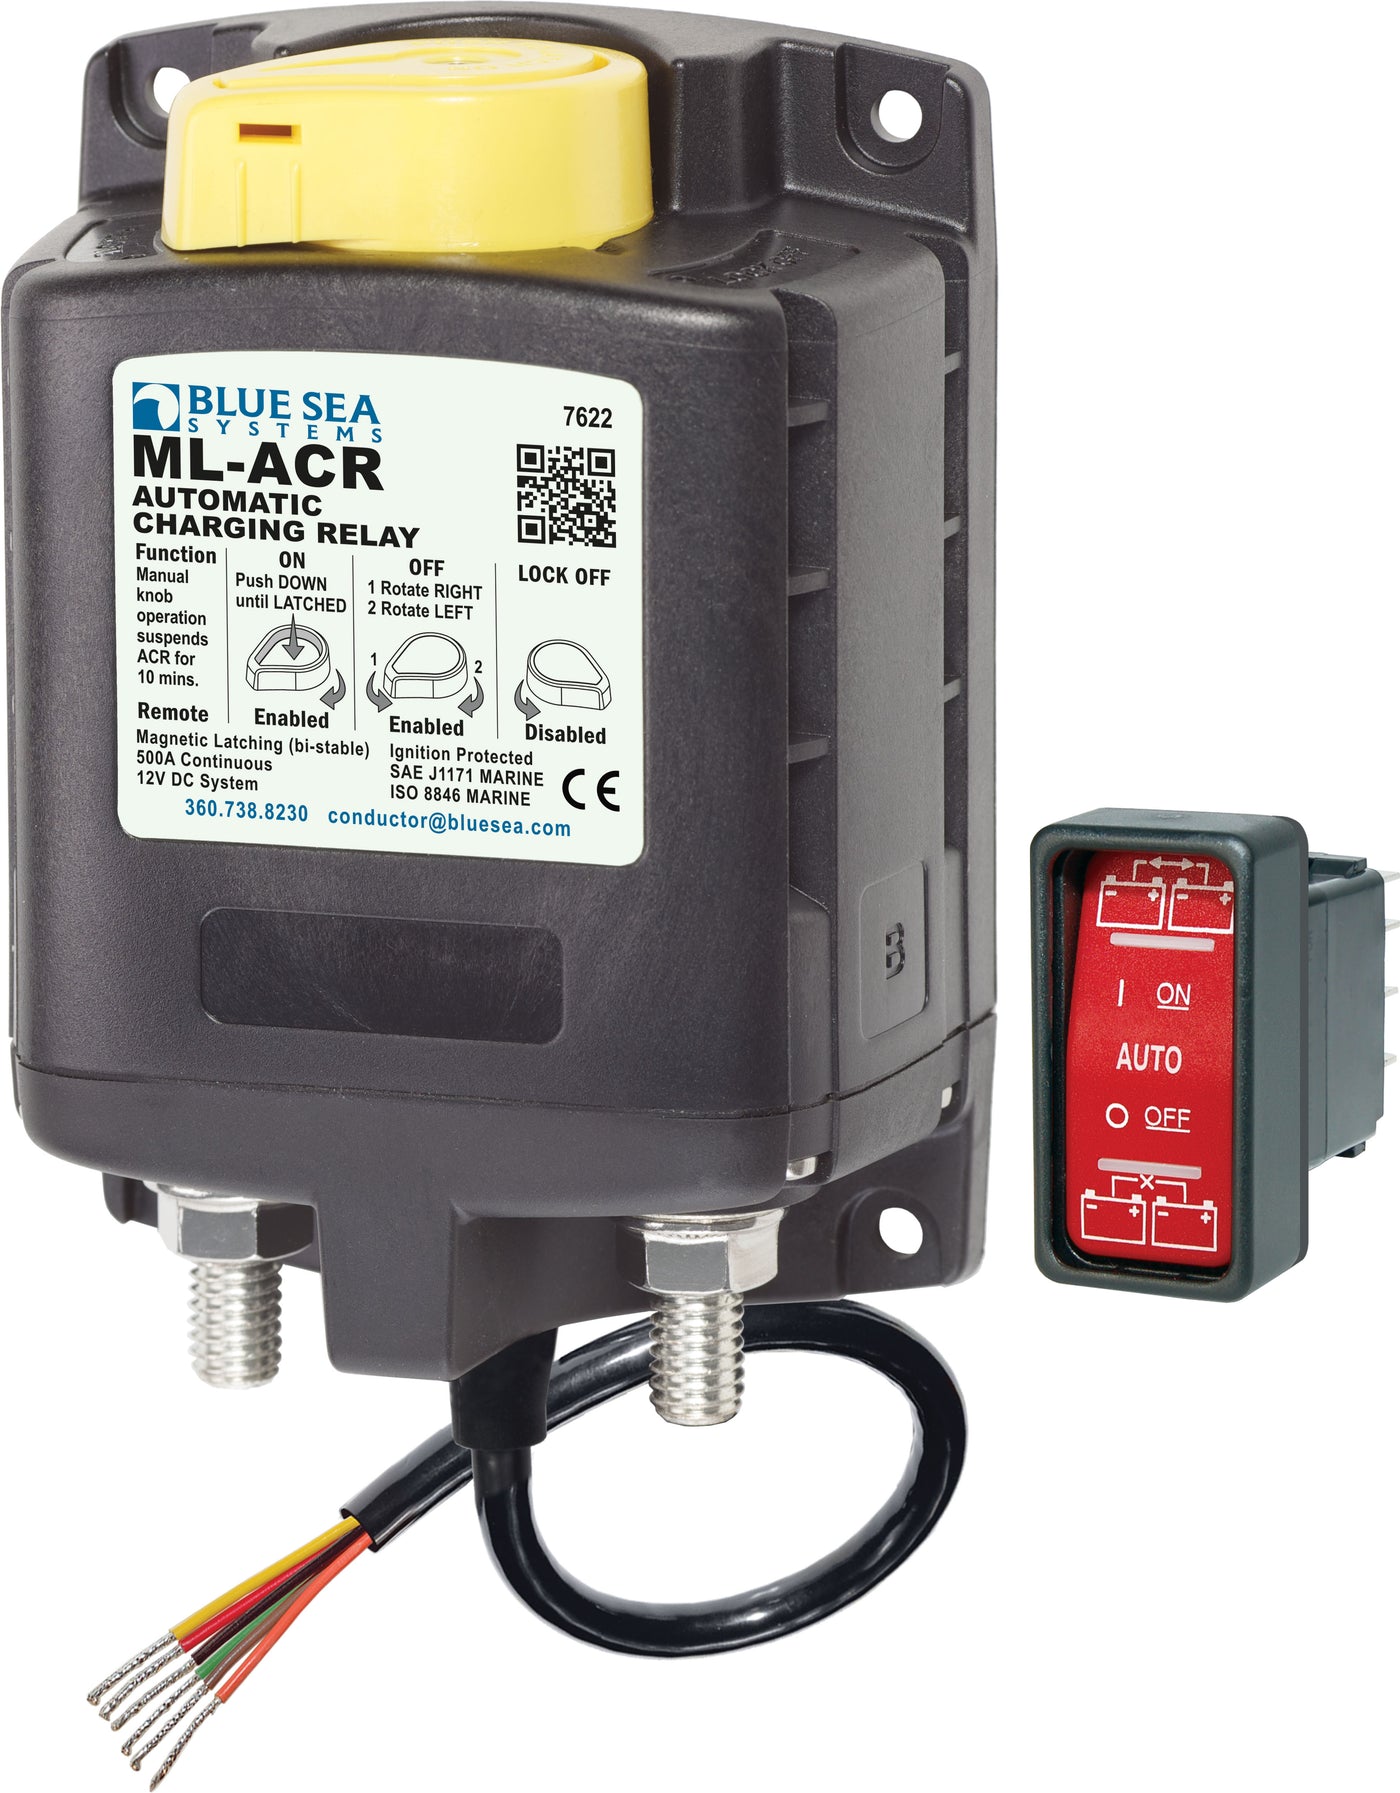 Blue Sea ML-ACR (Automatic Charging Relay)